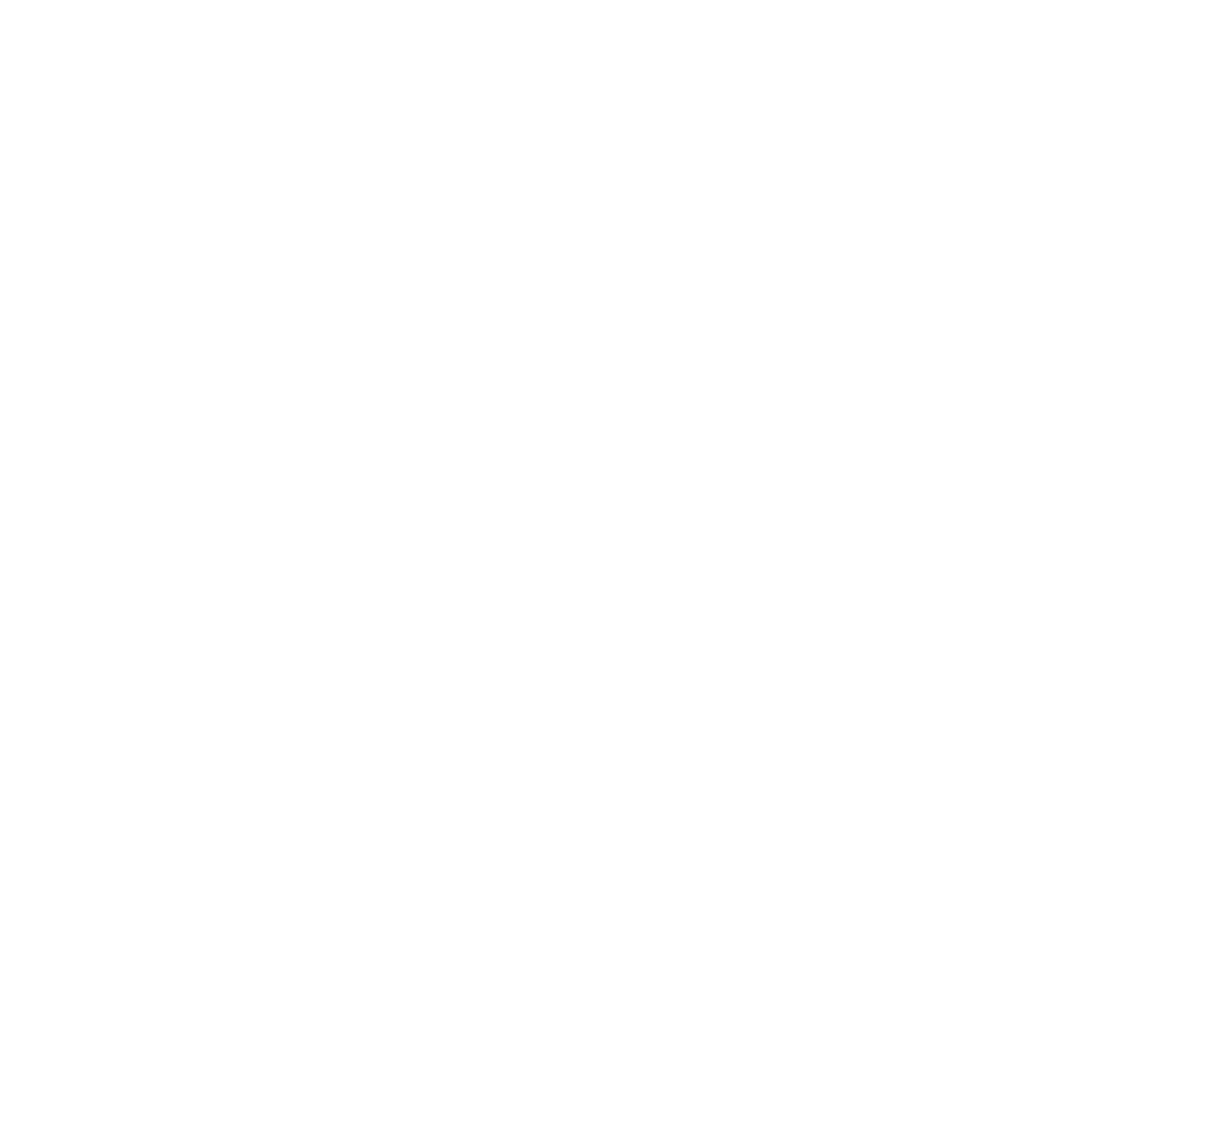 FIGHT FOR HER